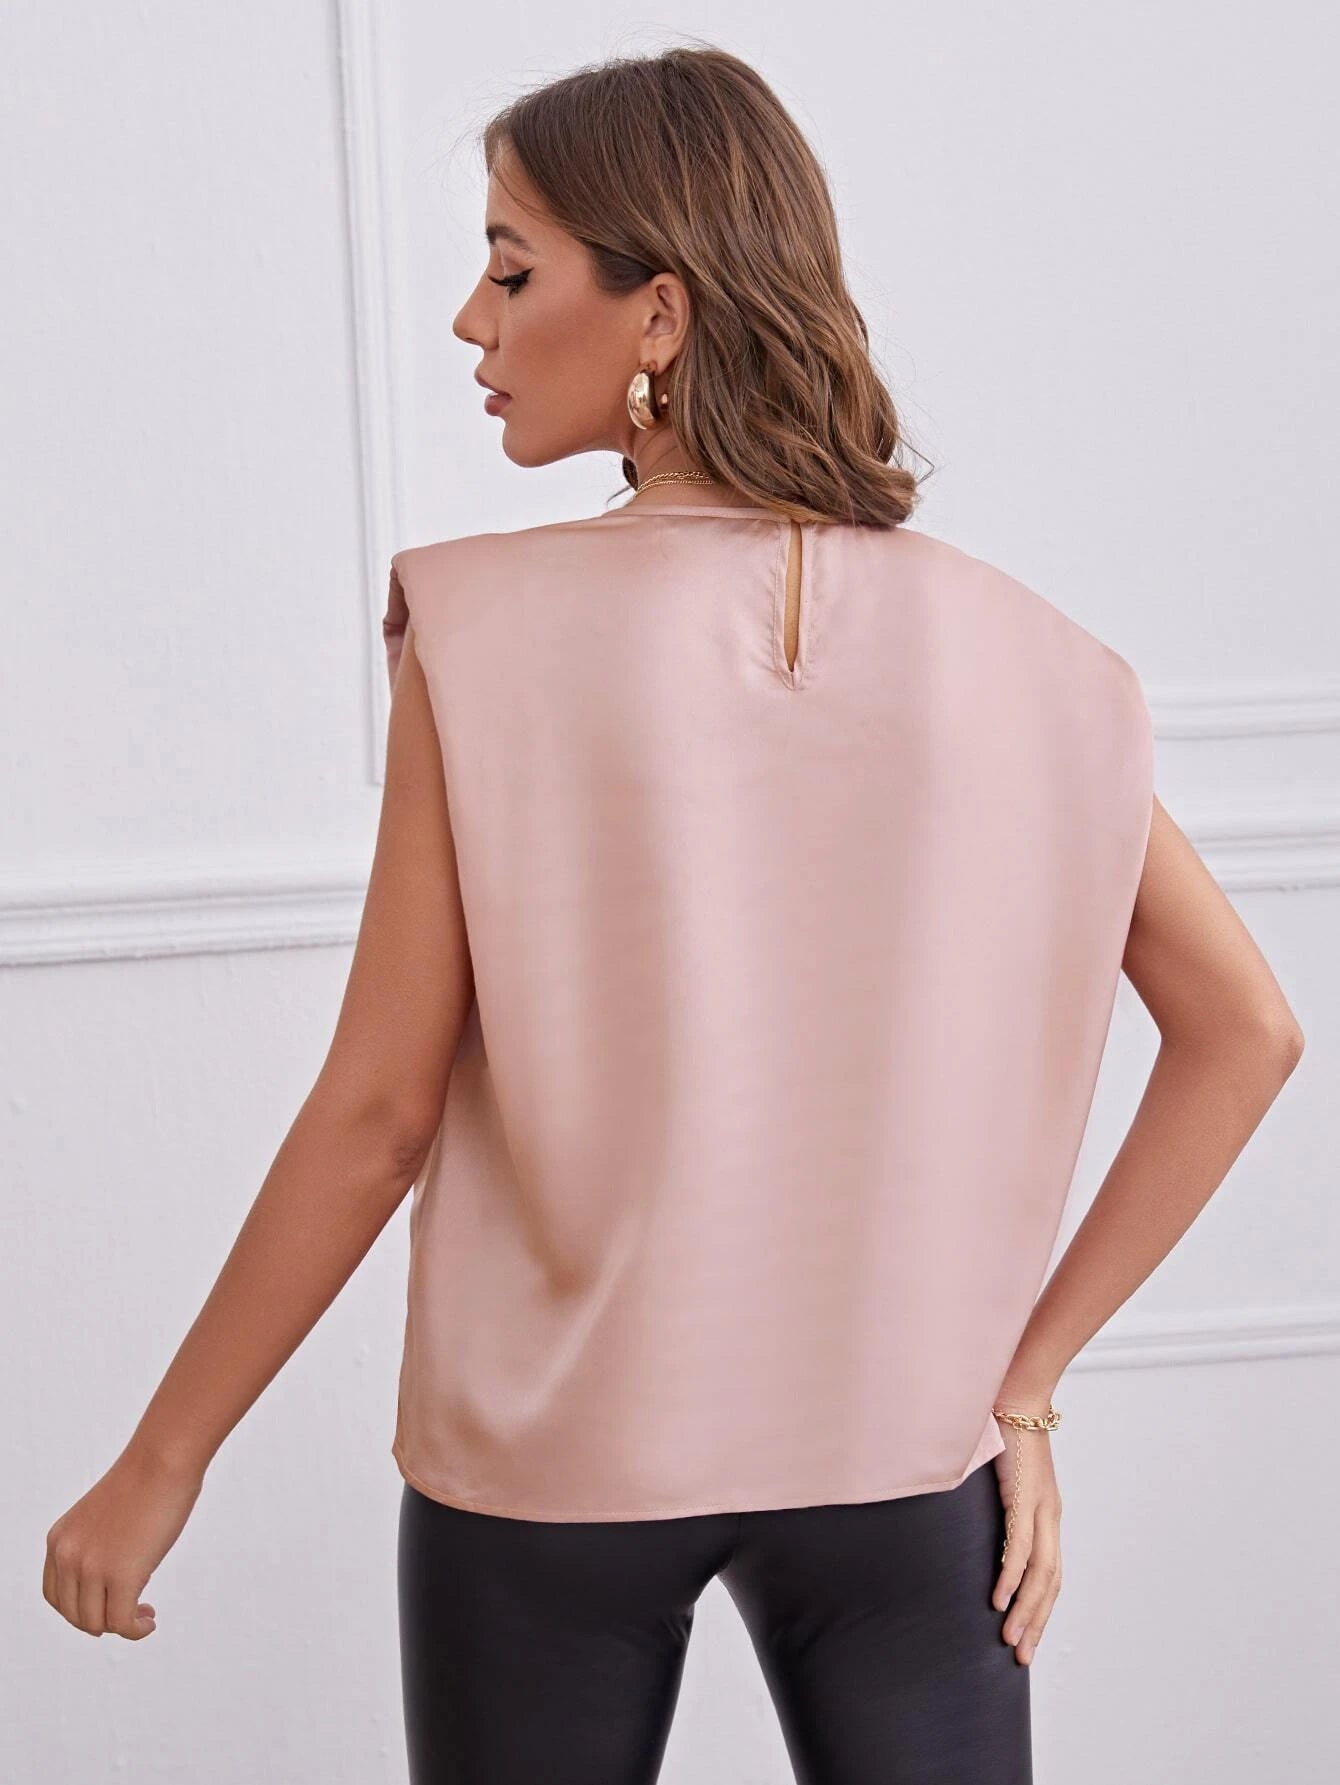 SHEIN Unity Solid Sleeveless Shoulder Pad Satin Top